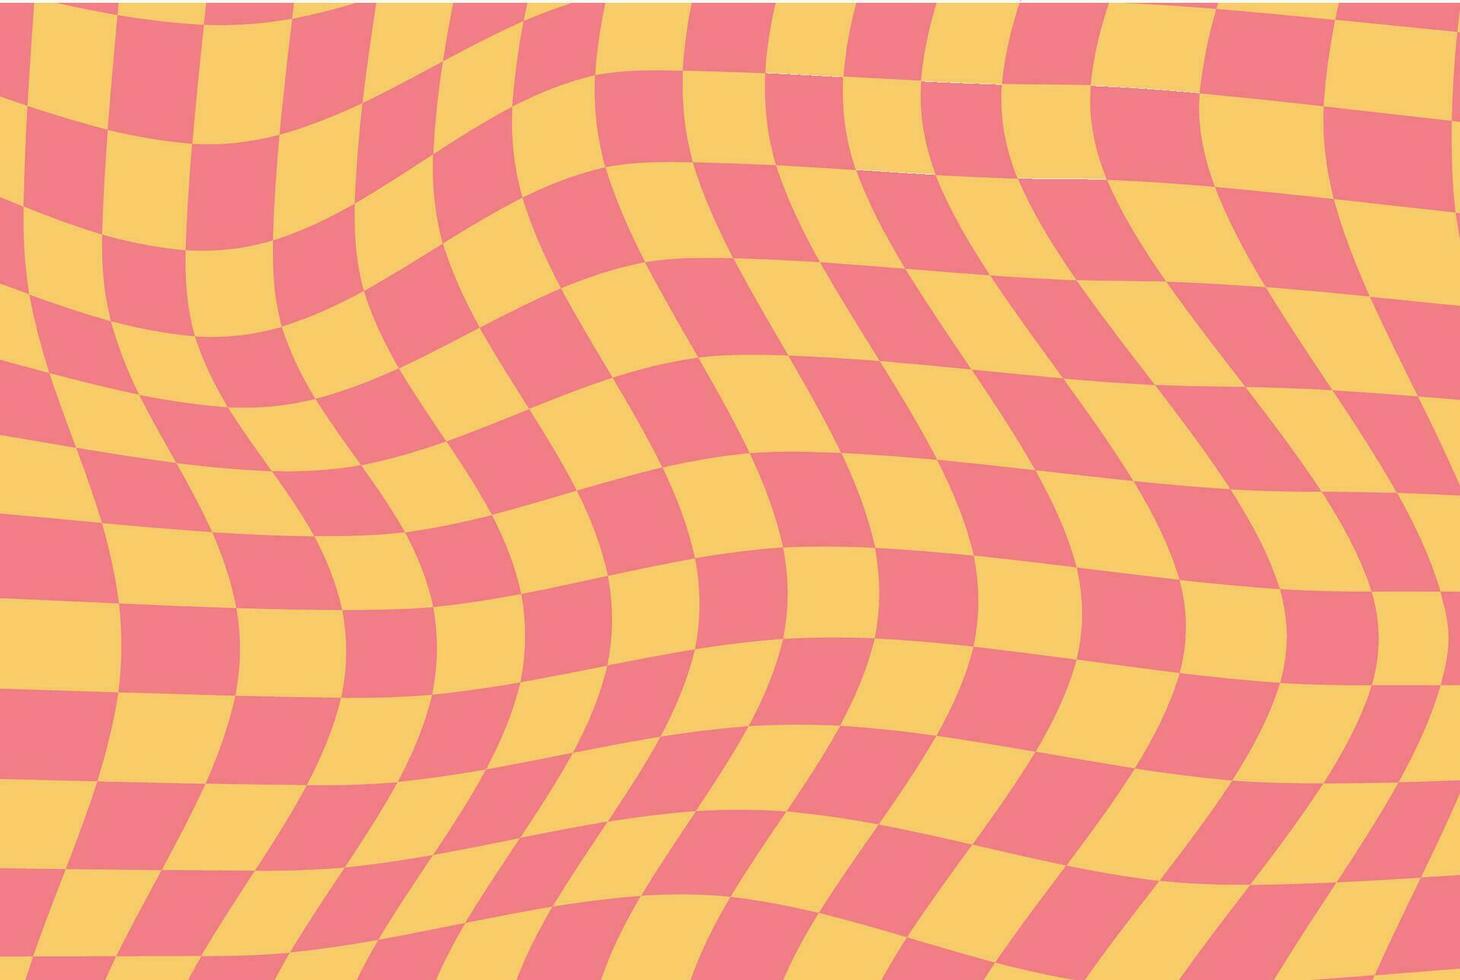 Groovy hippie 70s backgrounds.Checkerboard,waves patterns. Y2K retro psychedelic. Vector illustration.